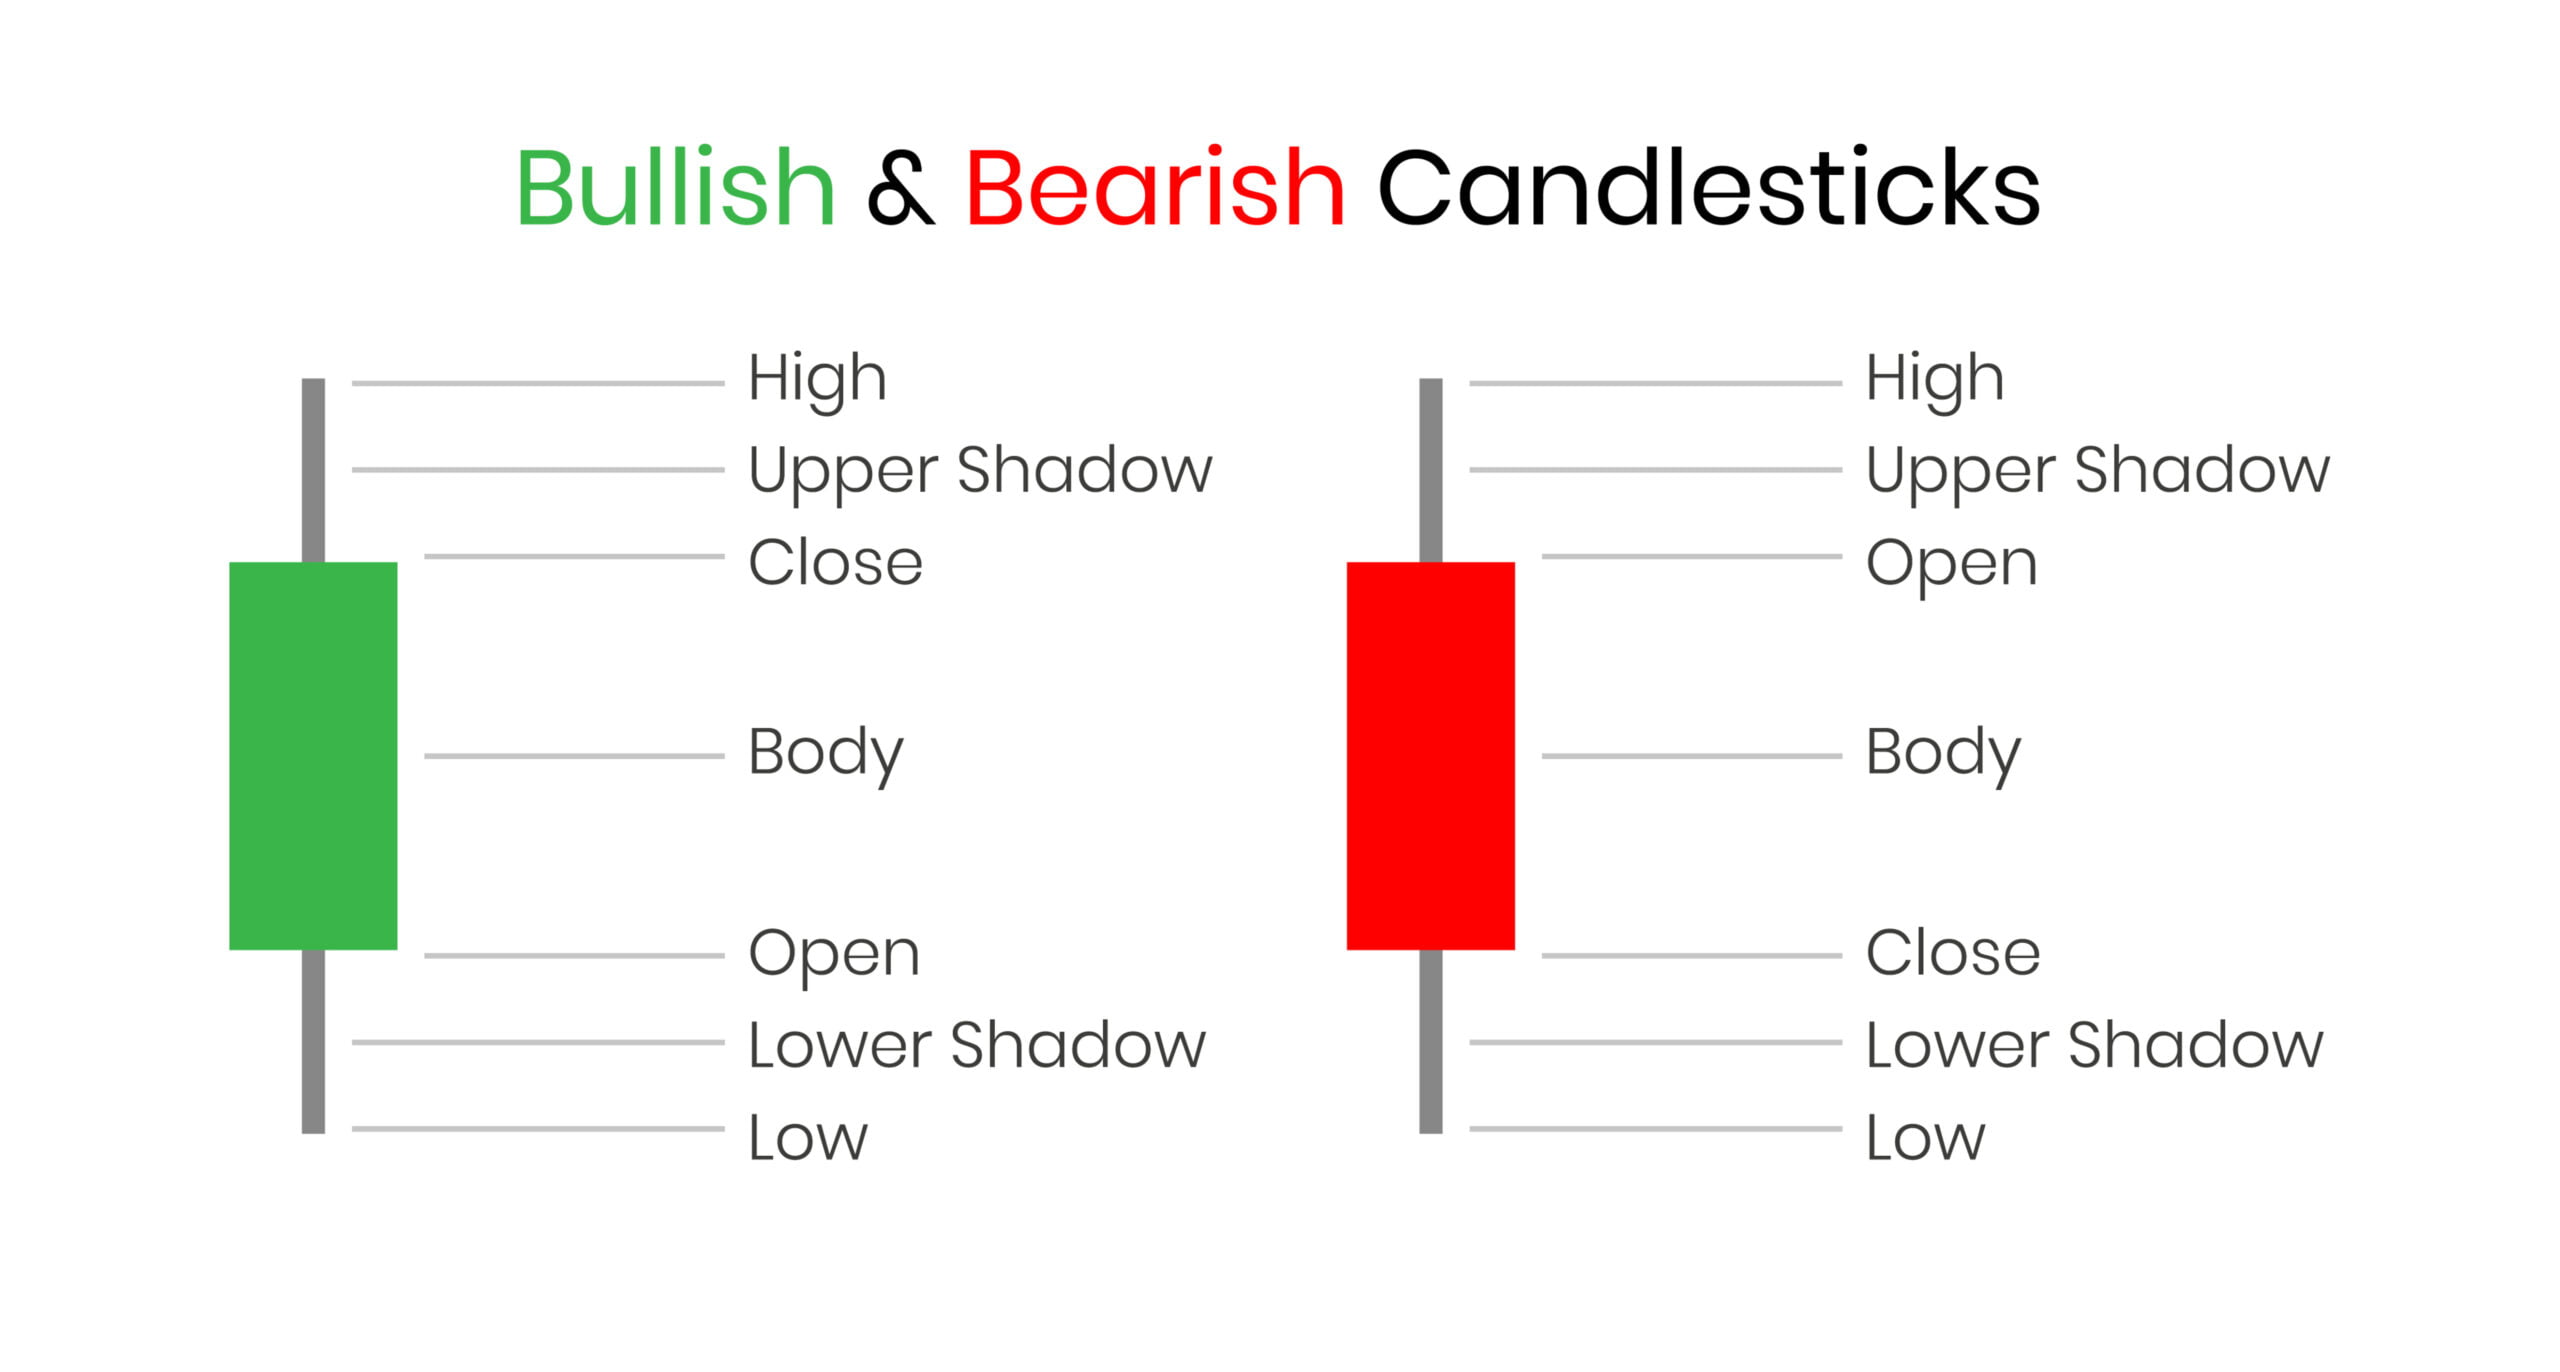 Bullish and Bearish candlestick charts which show the high and low prices, and opening and closing prices of a stock.